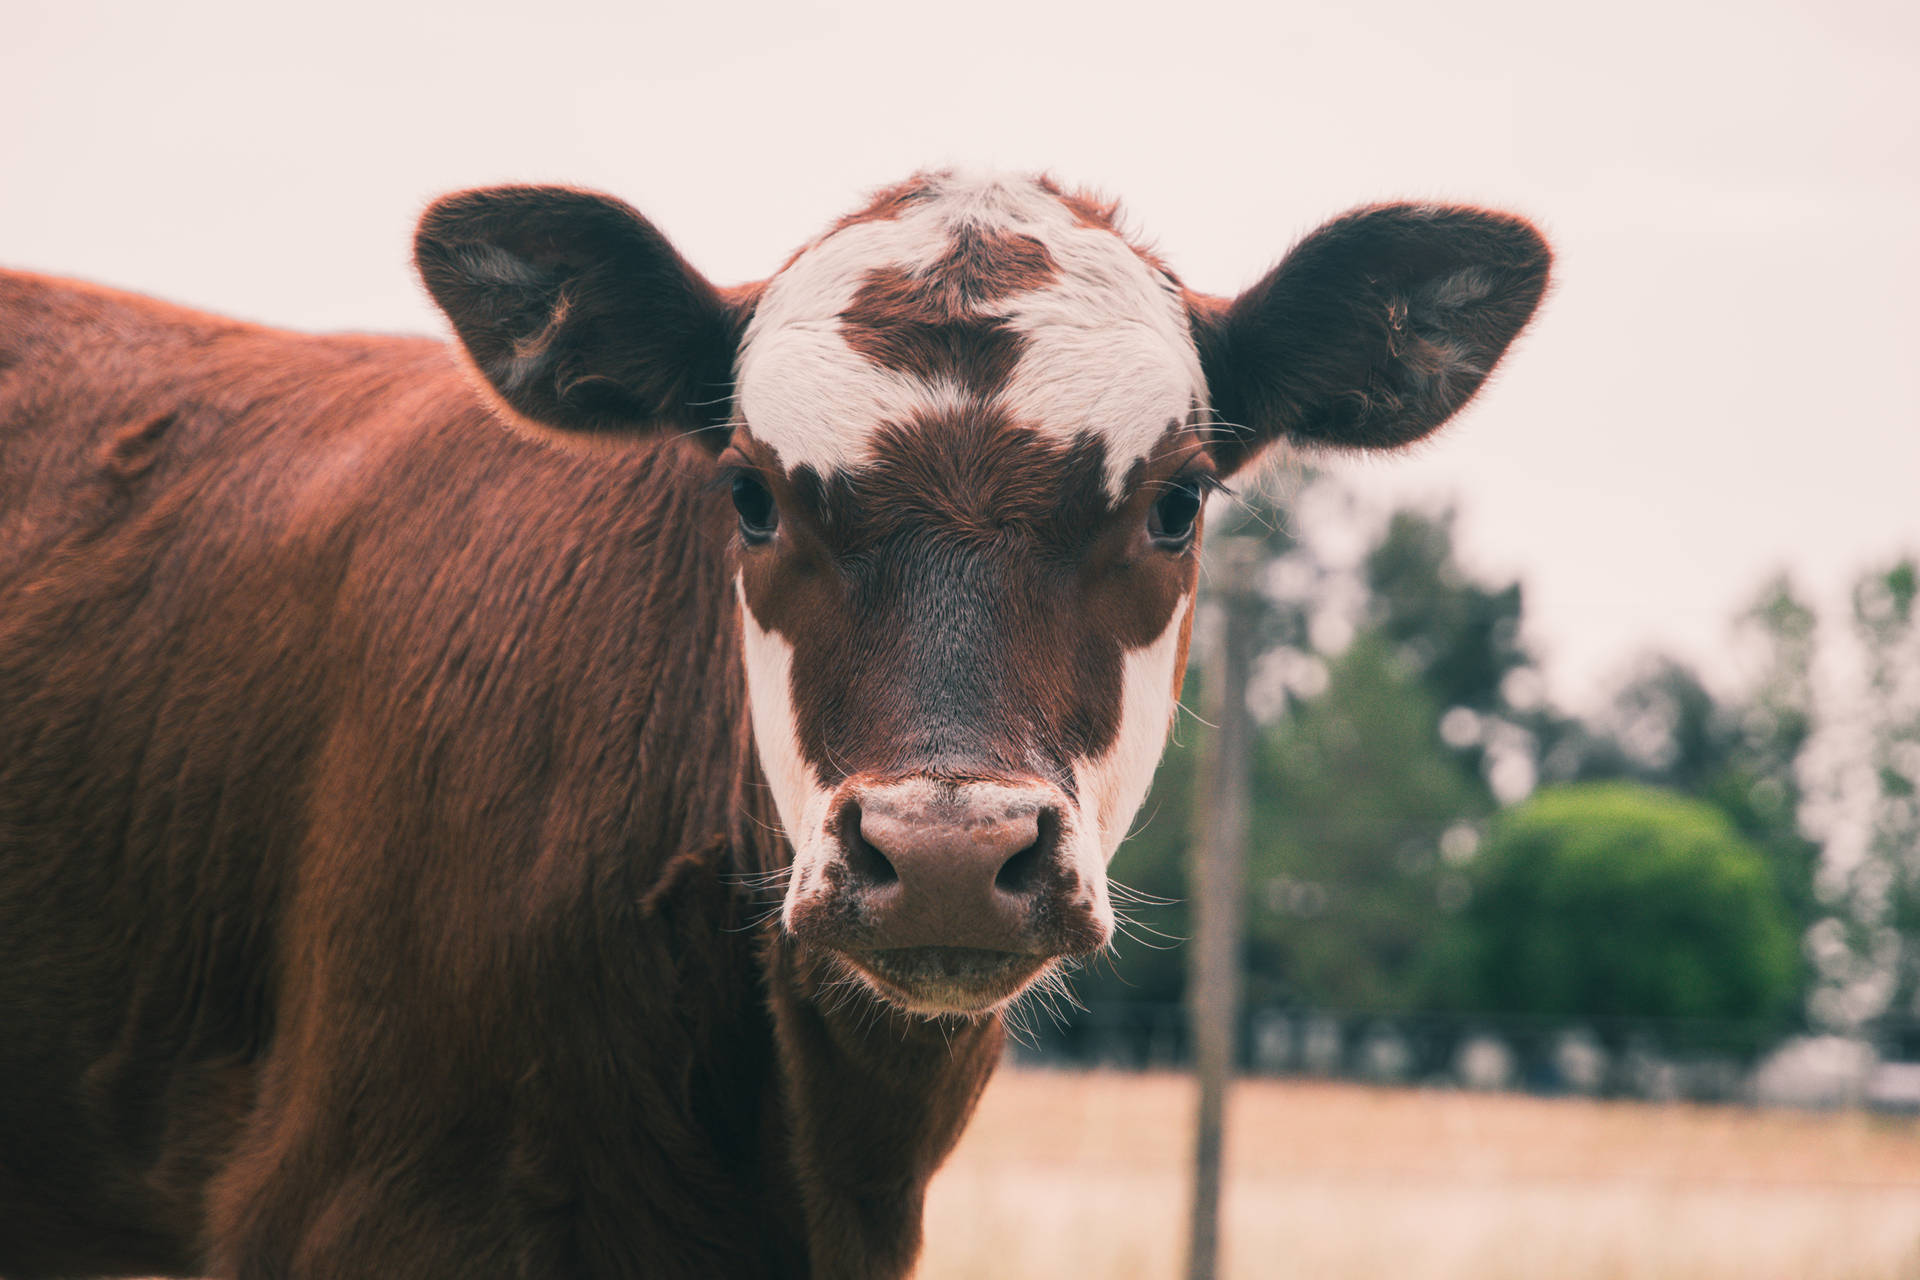 Cute Cow With Brown And White Facial Marks